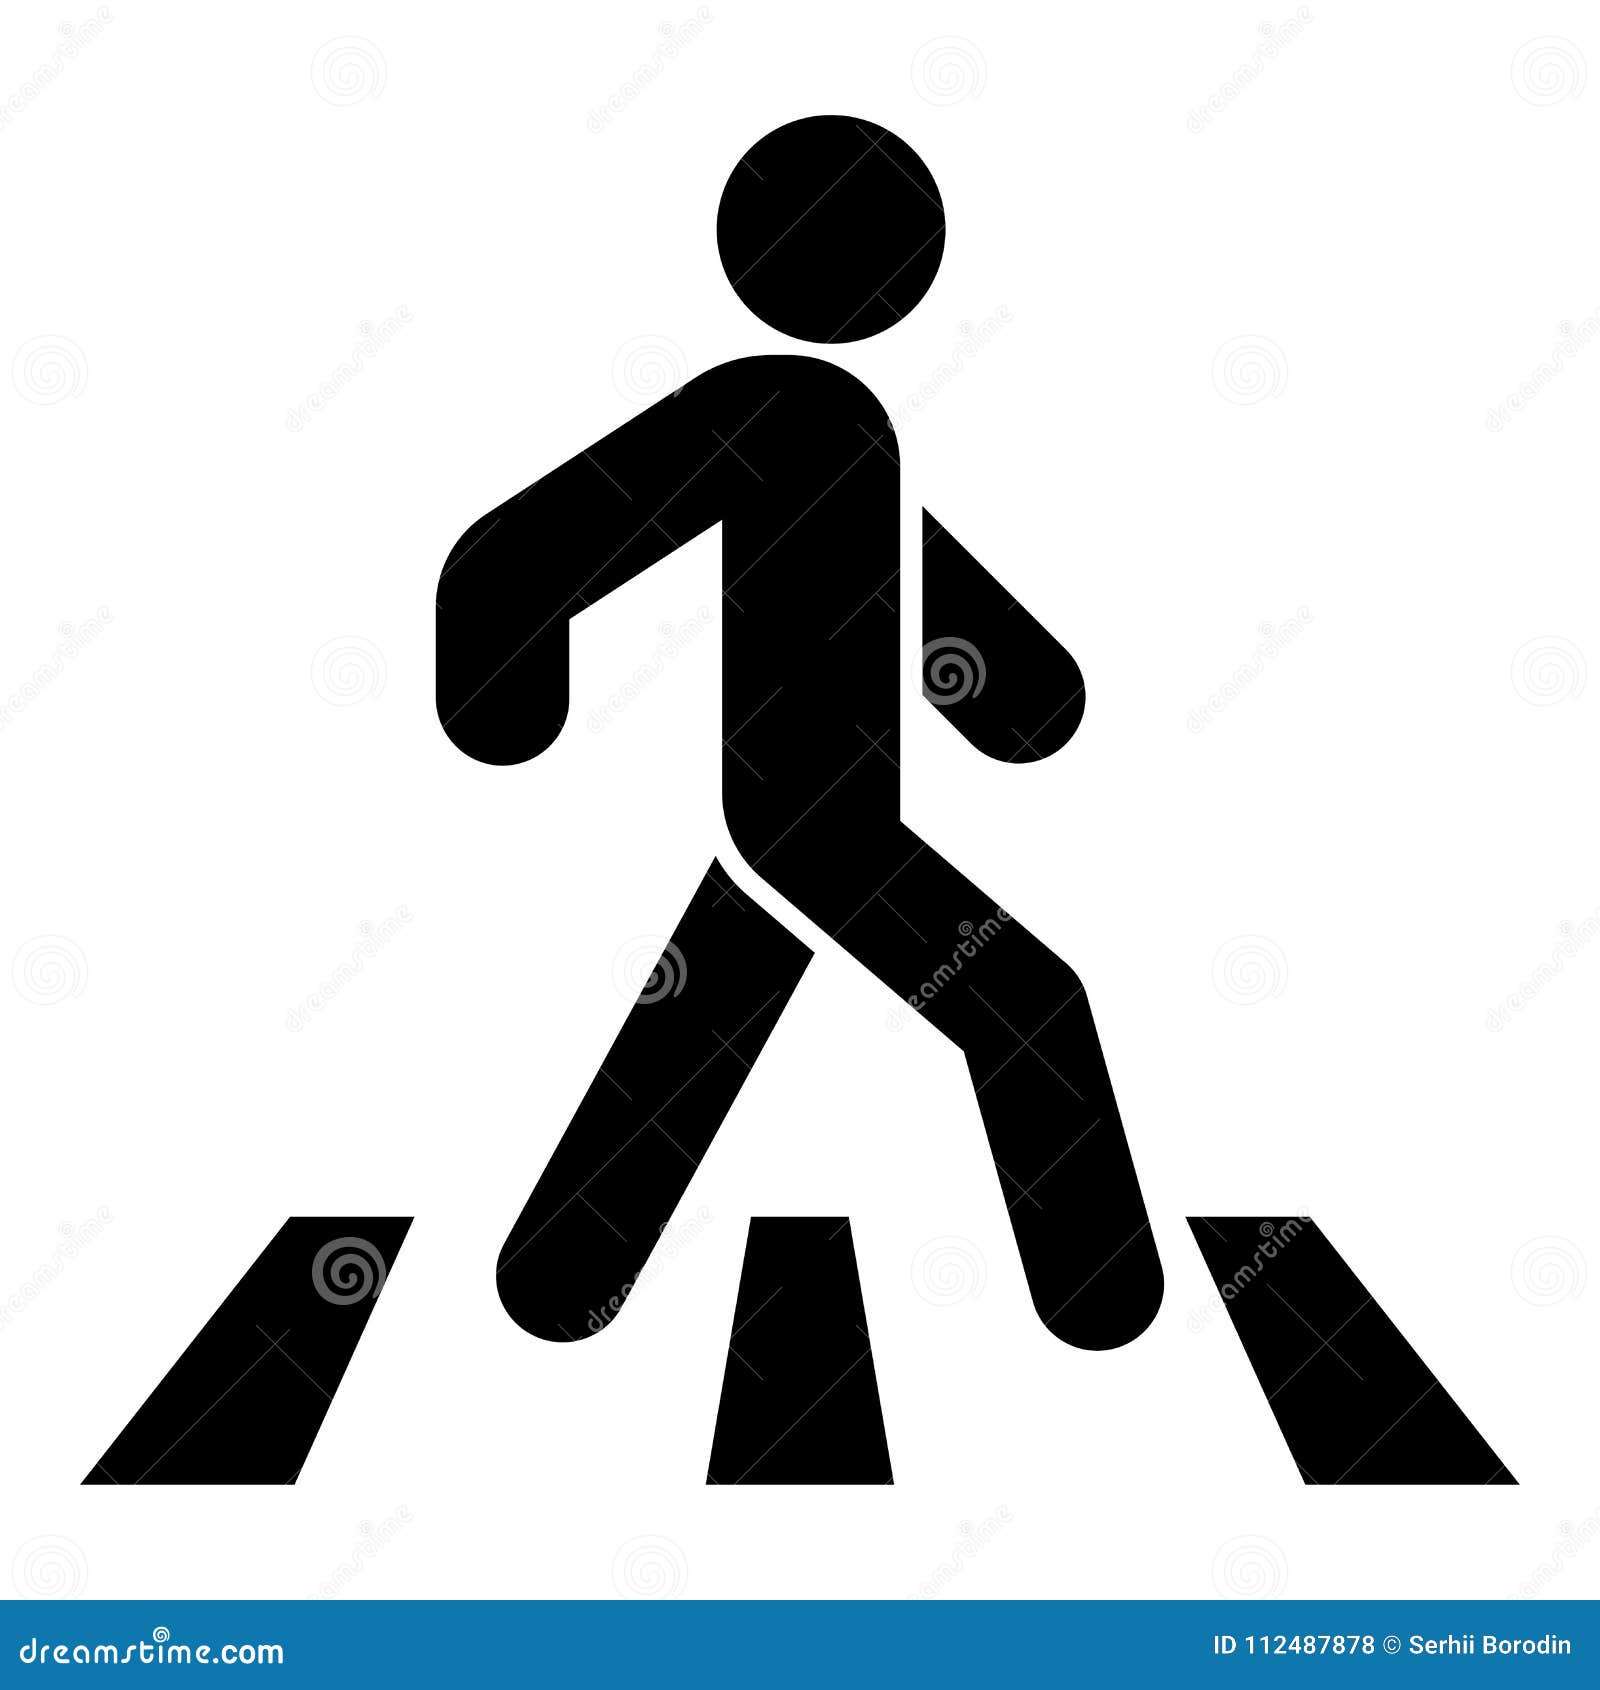 pedestrian on zebra crossing icon black color  flat style simple image